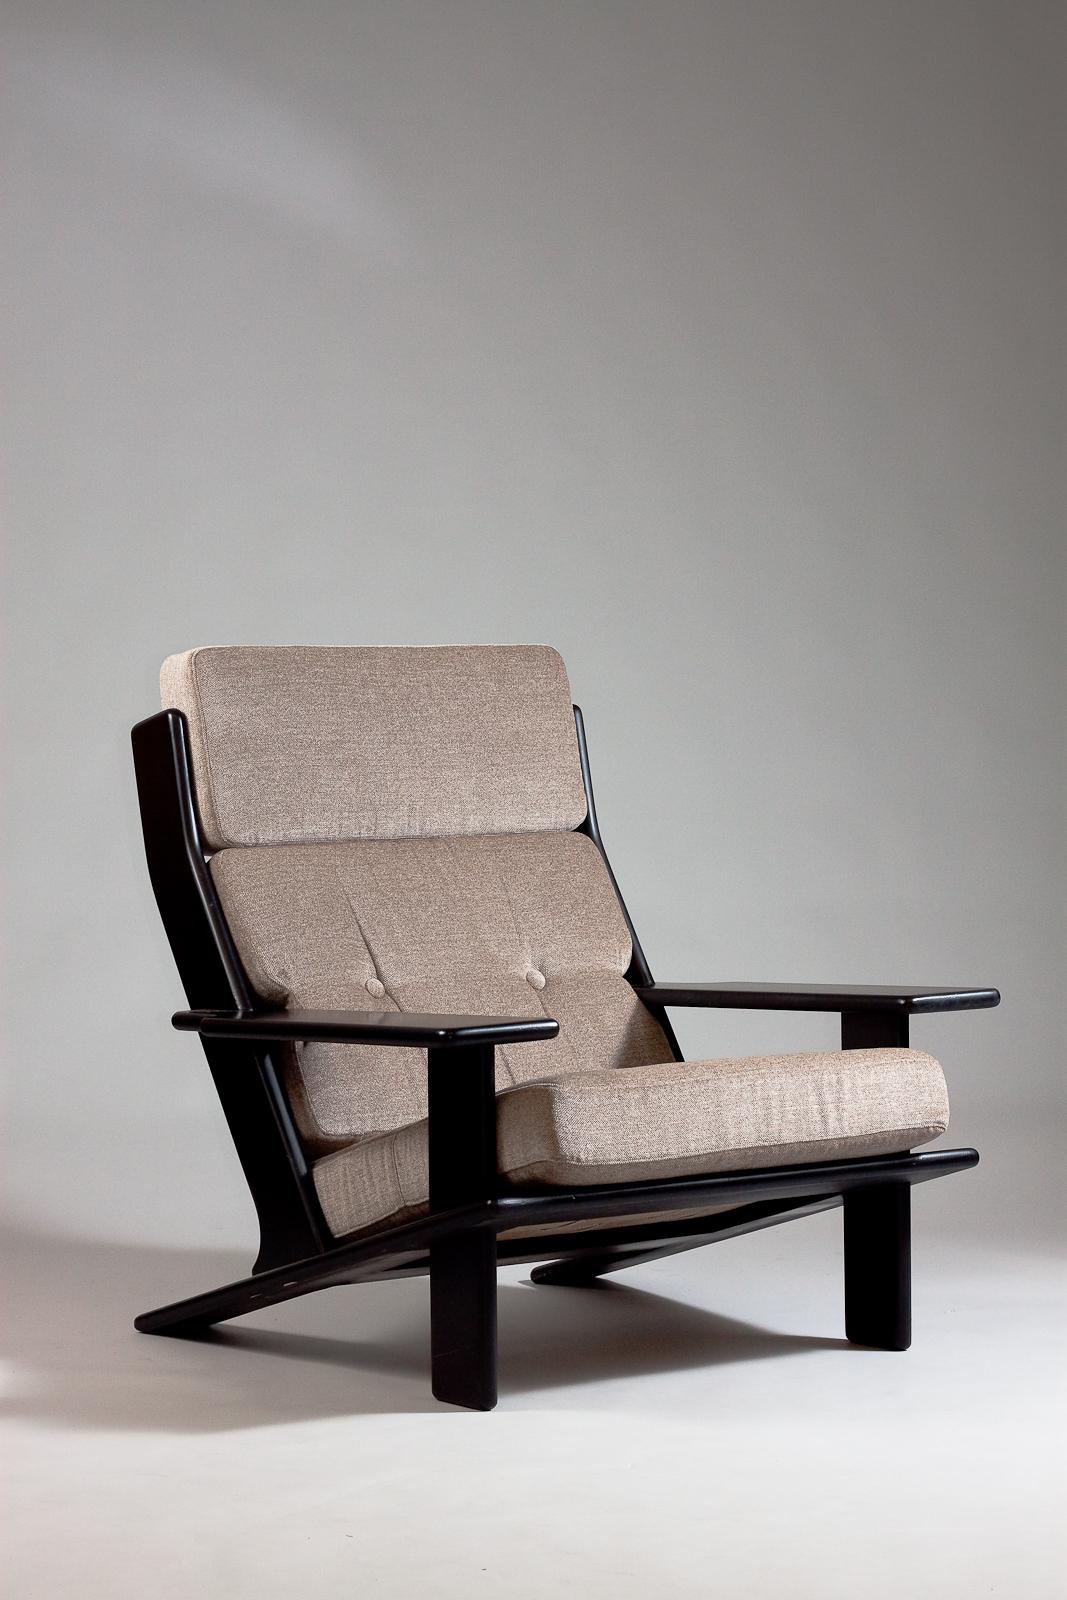 Introducing the Esko Pajamies lounge chair Pele, an iconic piece of 1970's design for the Lepokalustokalusto collection. This stylish and comfortable lounge chair features a sleek and minimalistic design. The perfect addition to any retro-inspired